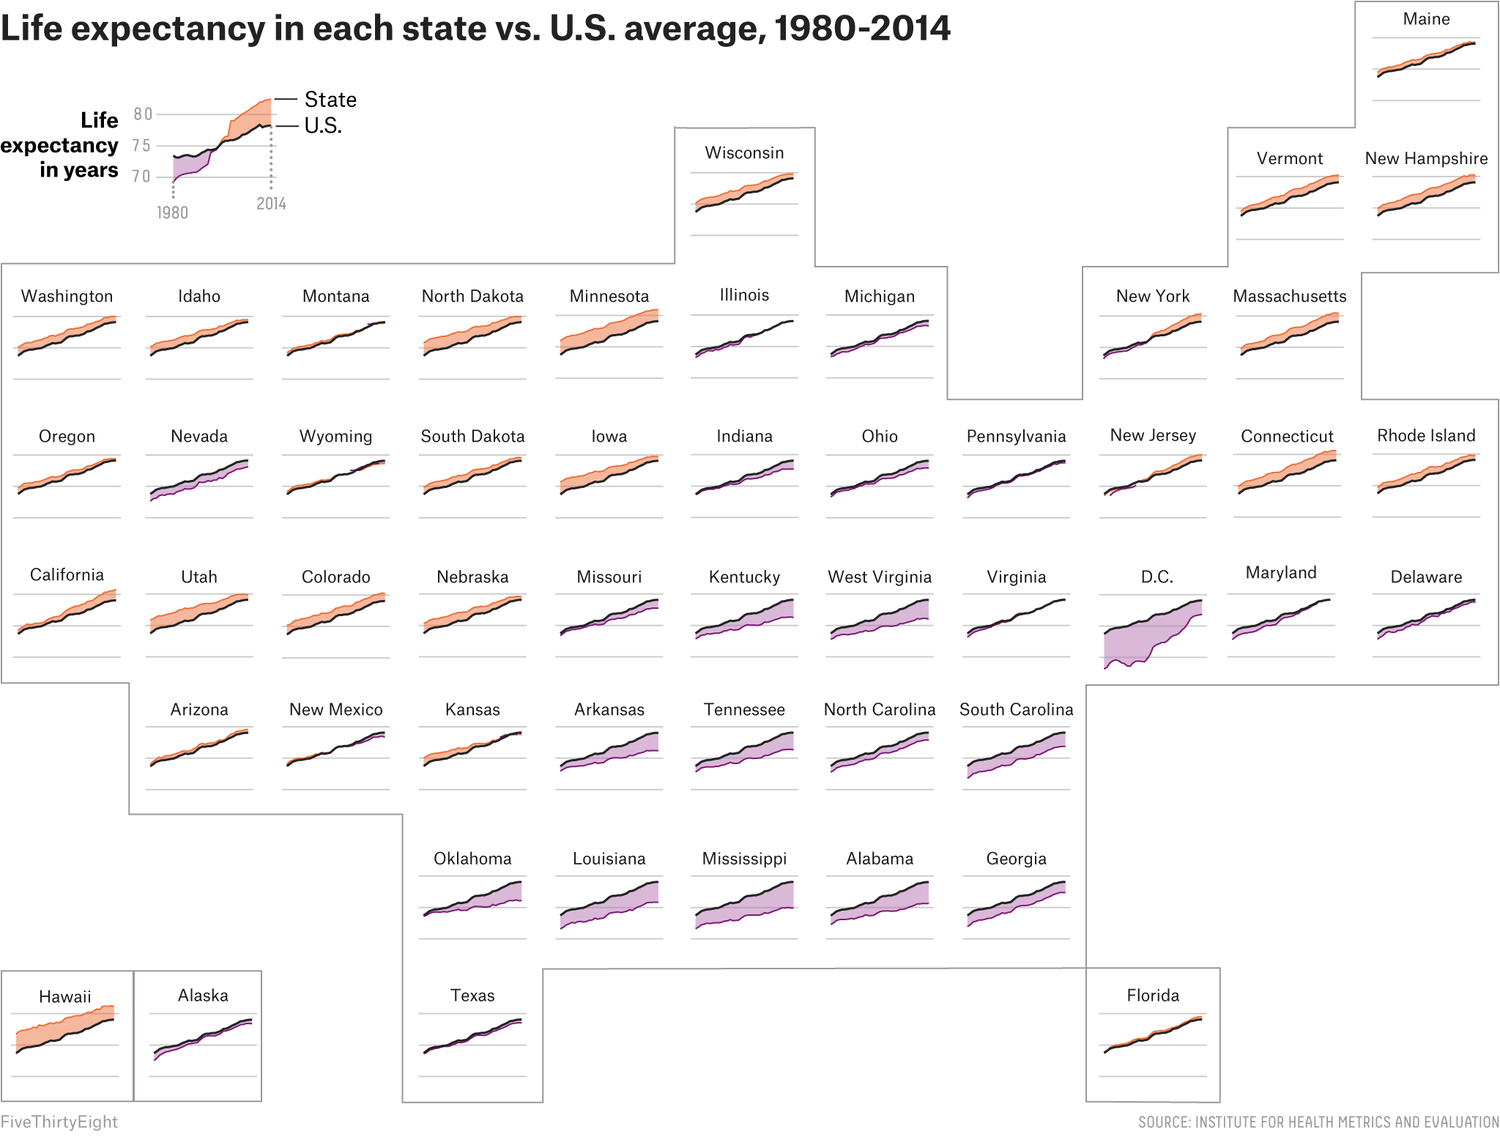 A plot of small multiples, laid out in the shape of the United States, to show how life expectancy differs from the average in the US across the states. There is a relatively low life expectancy in Washington DC, and the south, and relatively high in Hawaii, the northeast, upper midwest, and west.